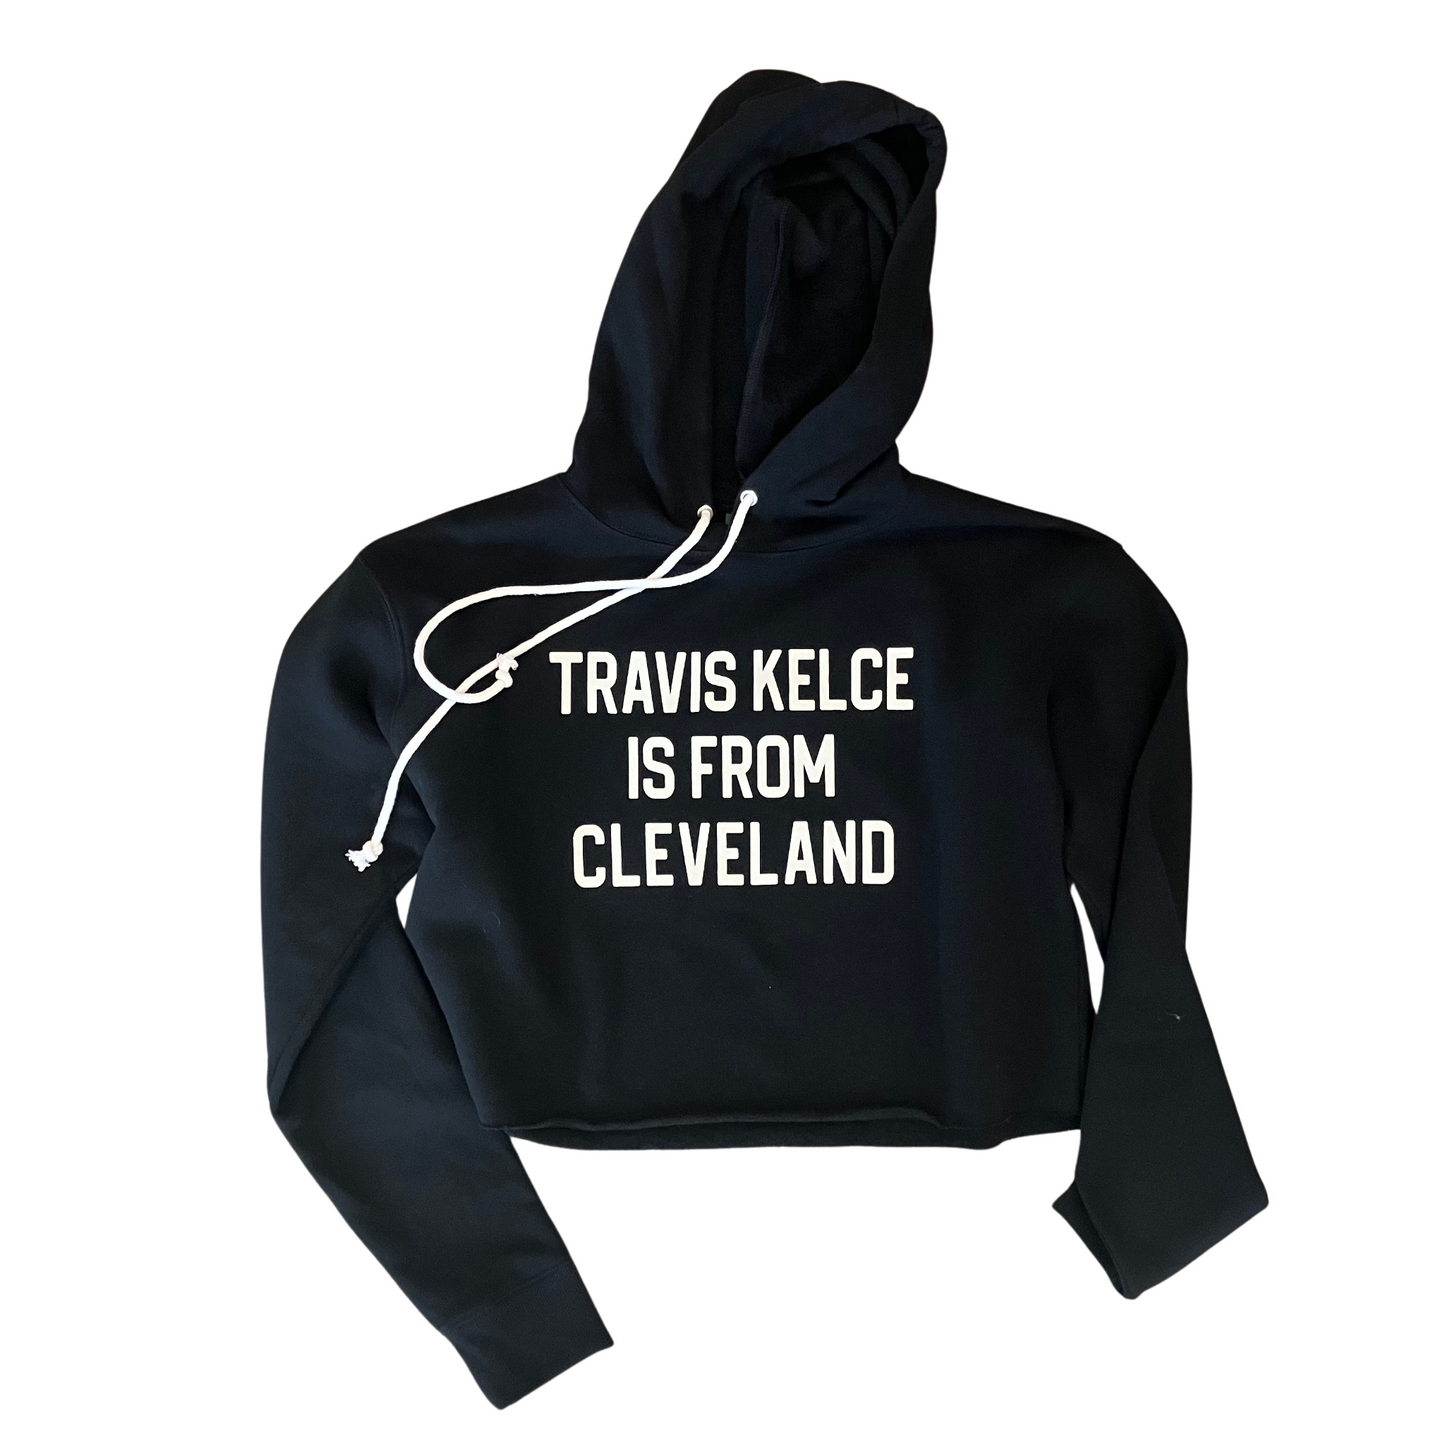 Travis Kelce is from Cleveland Cropped Hoodie